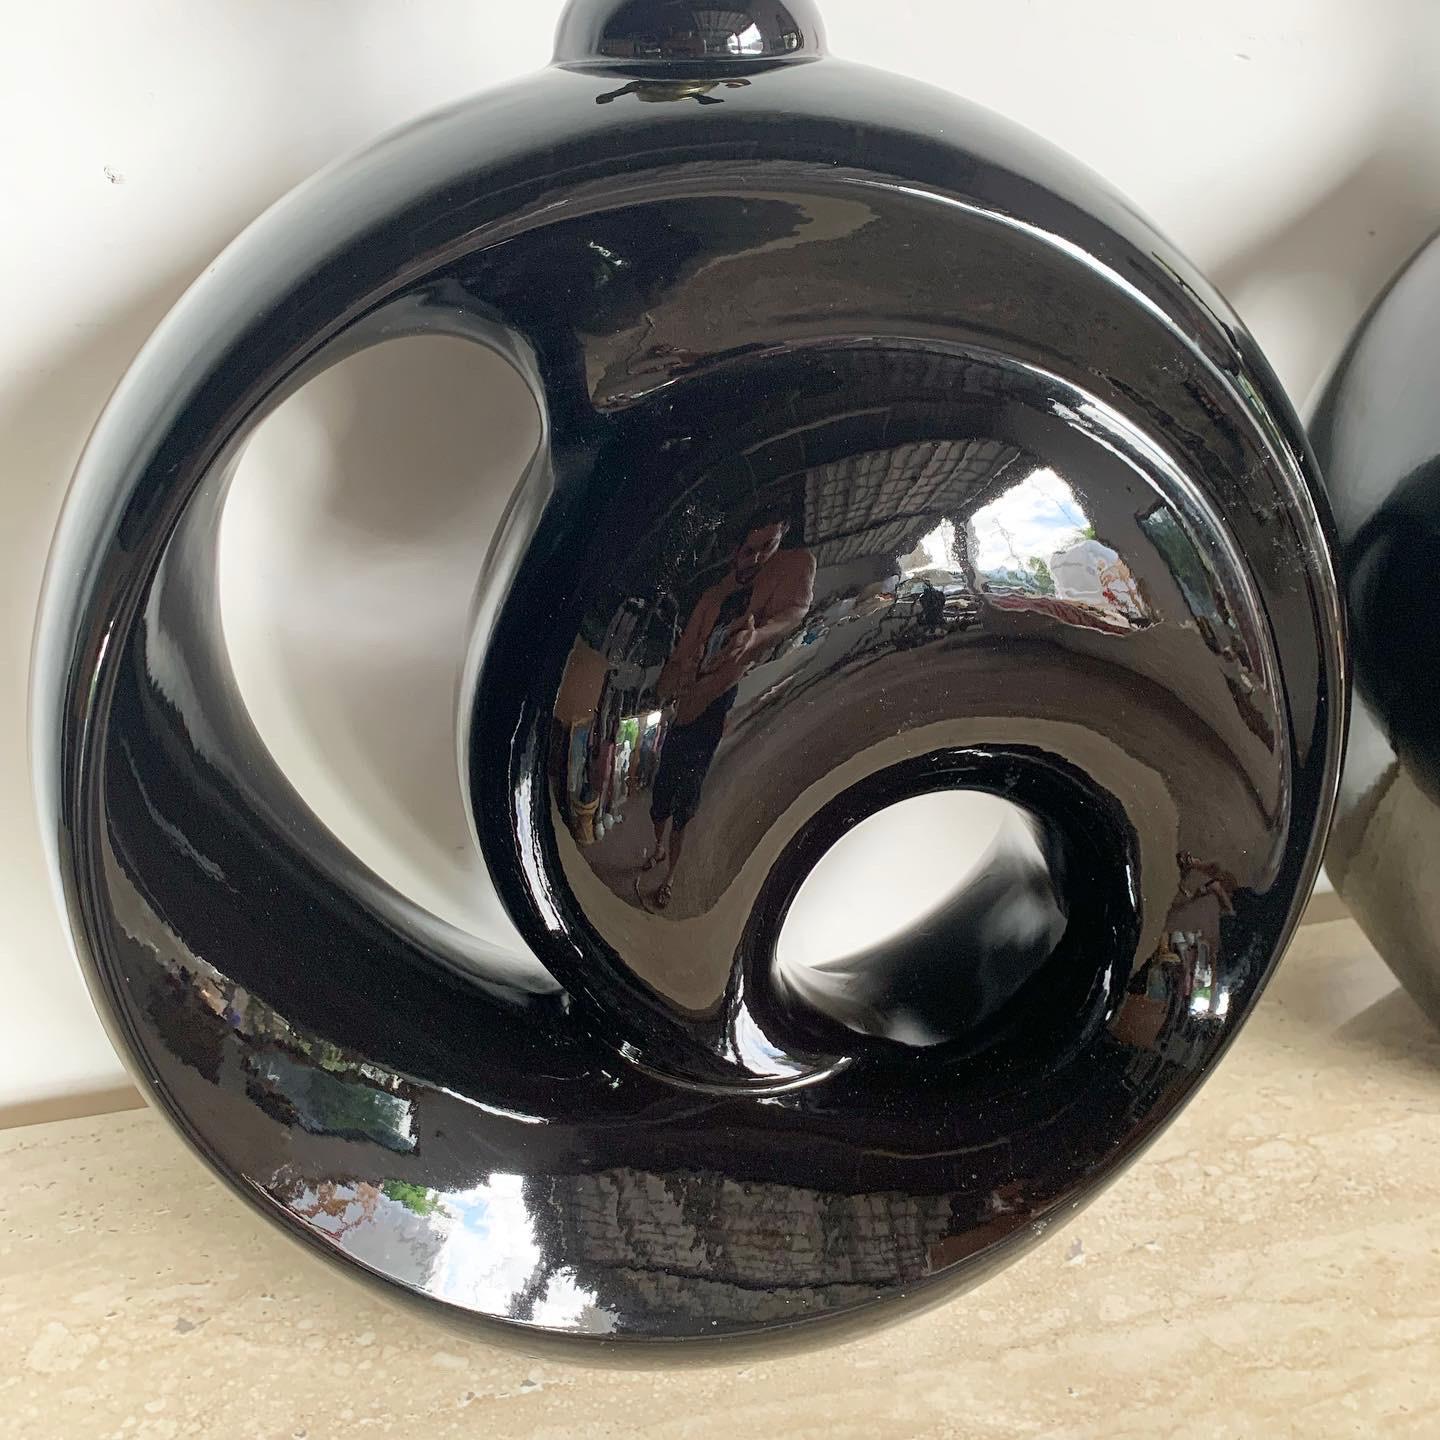 Enhance your space with Postmodern Black Gloss Sculpted Swirl Ceramic Table Lamps, boasting elegant design and sleek aesthetics.

Sculpted swirl design crafted in high-gloss black ceramic.
Exudes a sense of movement and sophistication.
Plays with